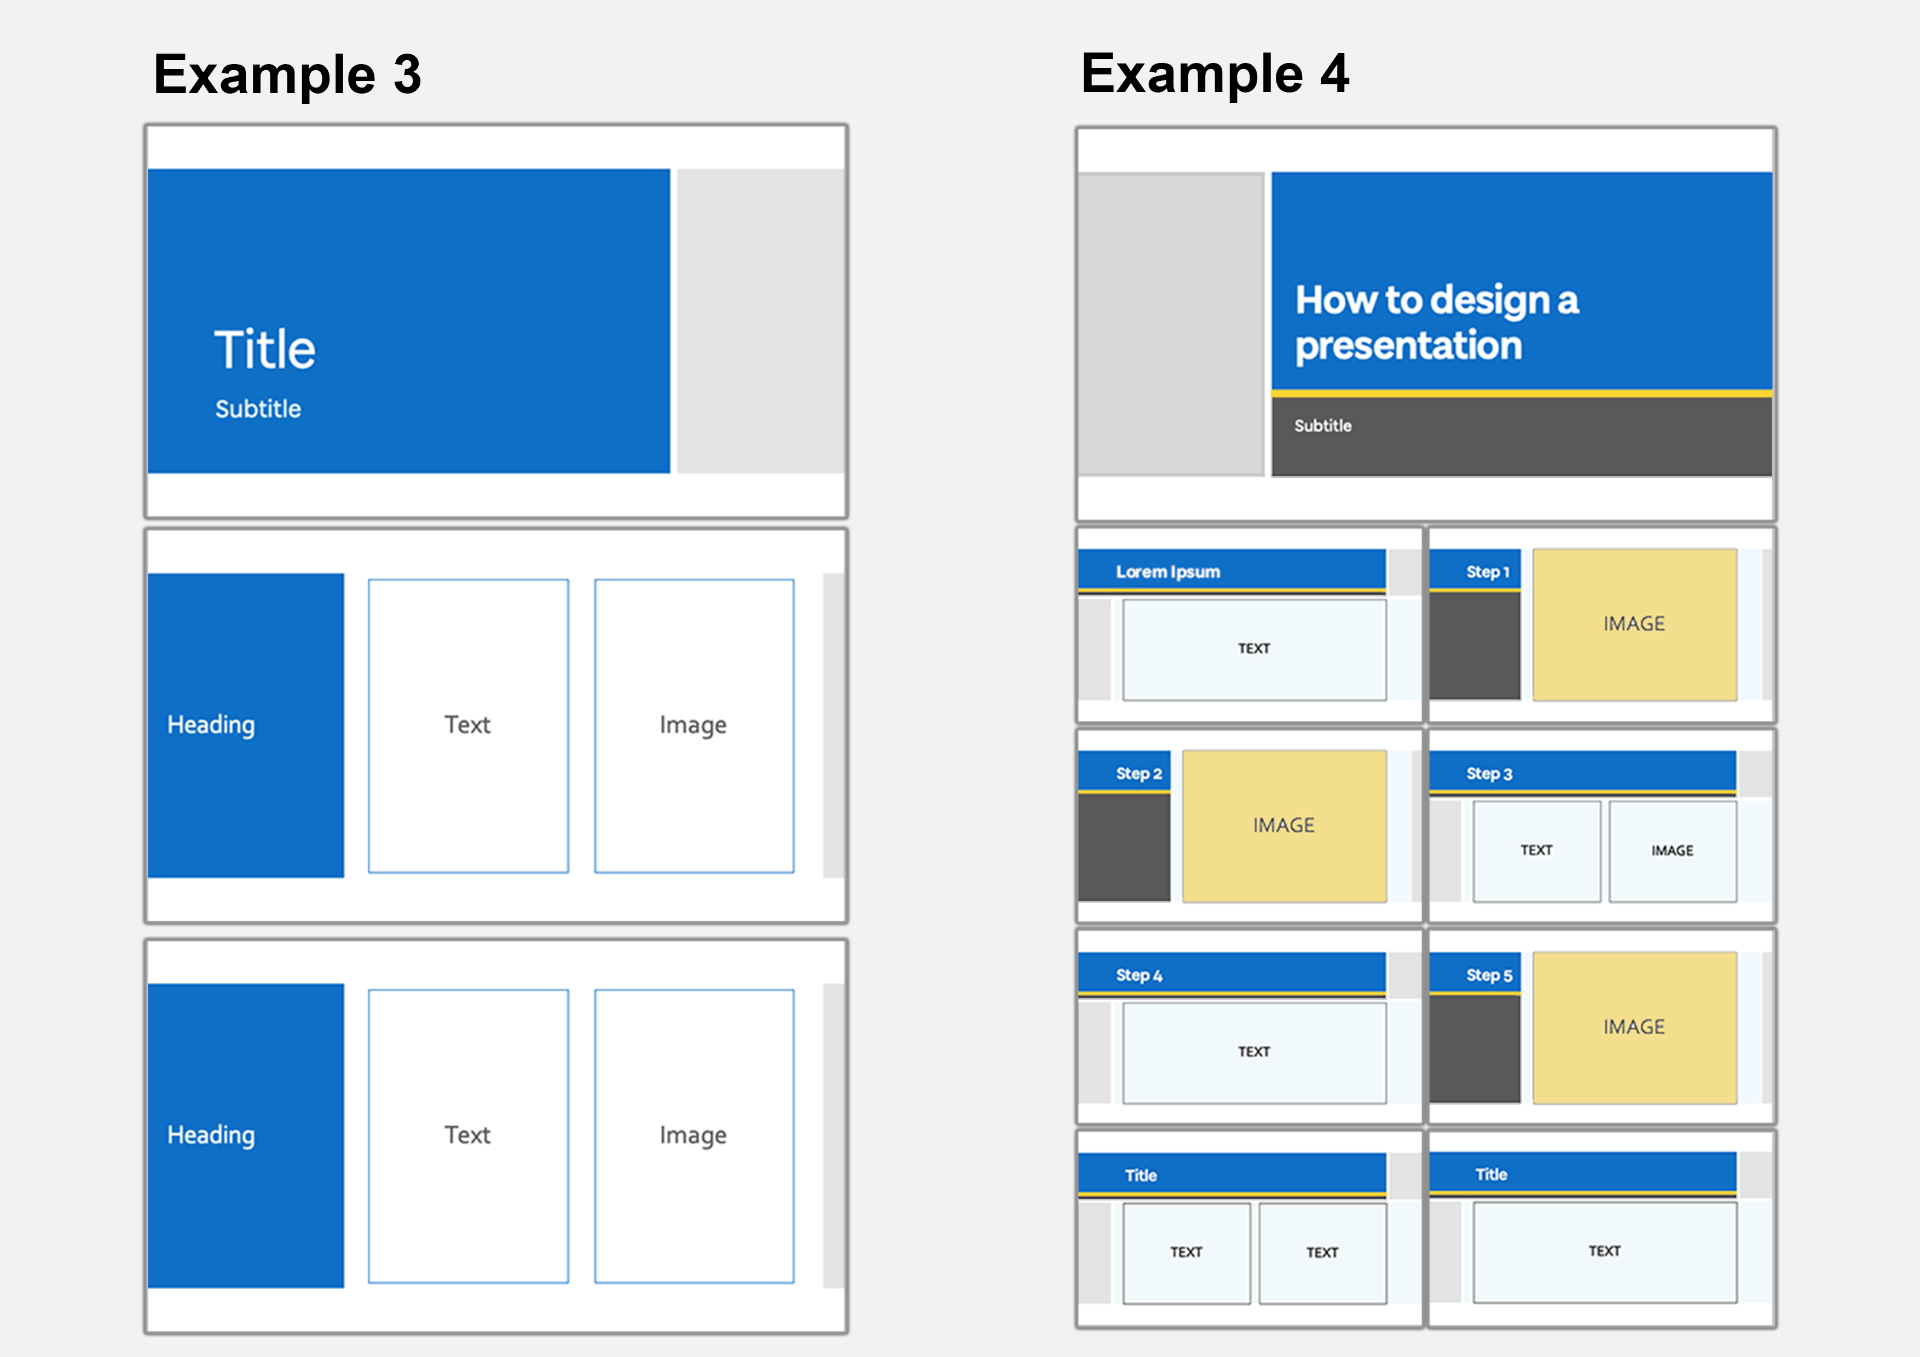 Example 3 and 4 showing consistent presentation themes